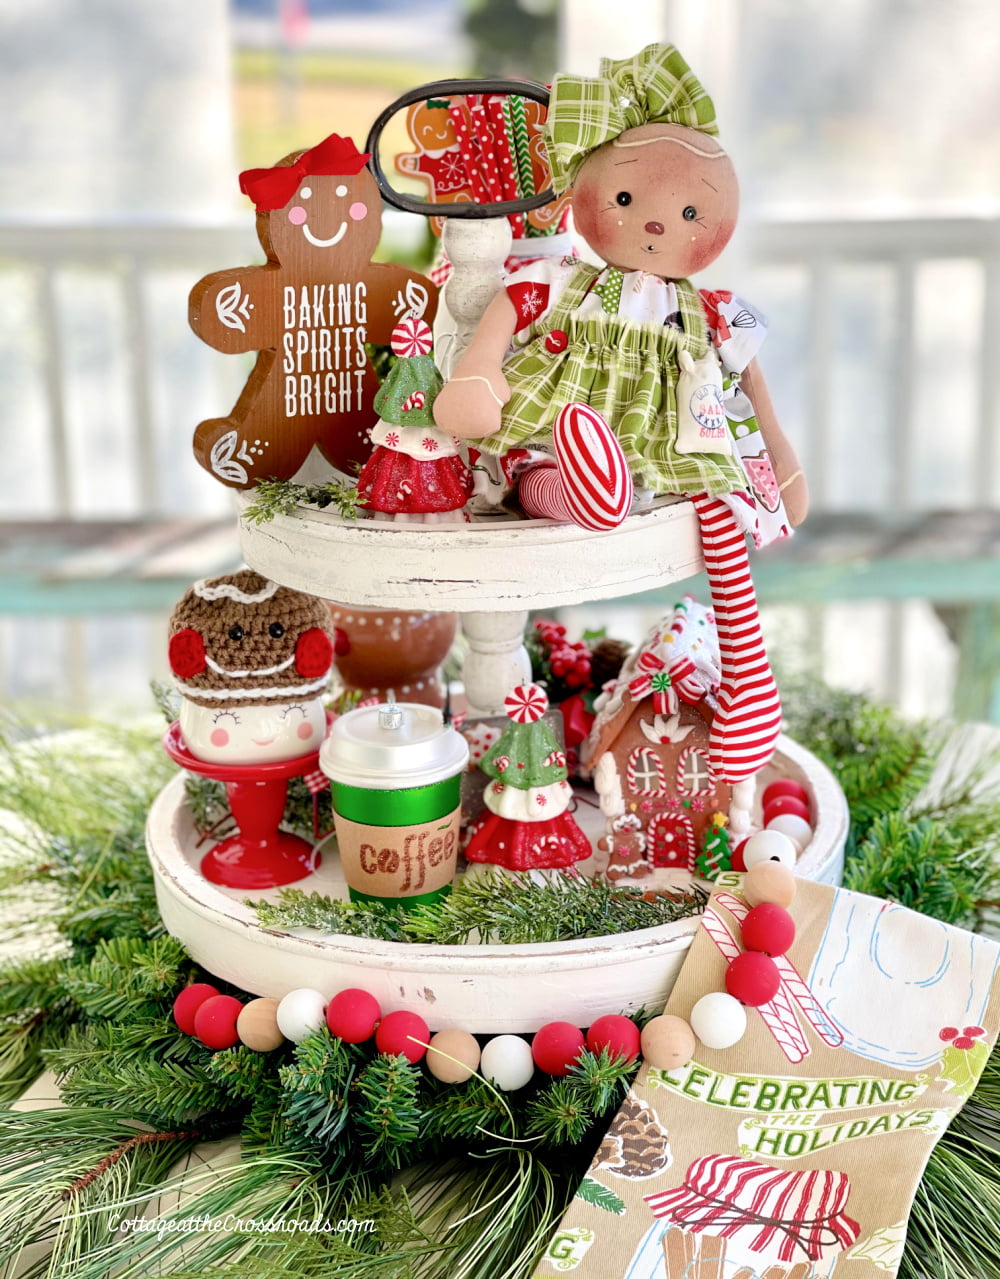 Gingerbread tiered tray